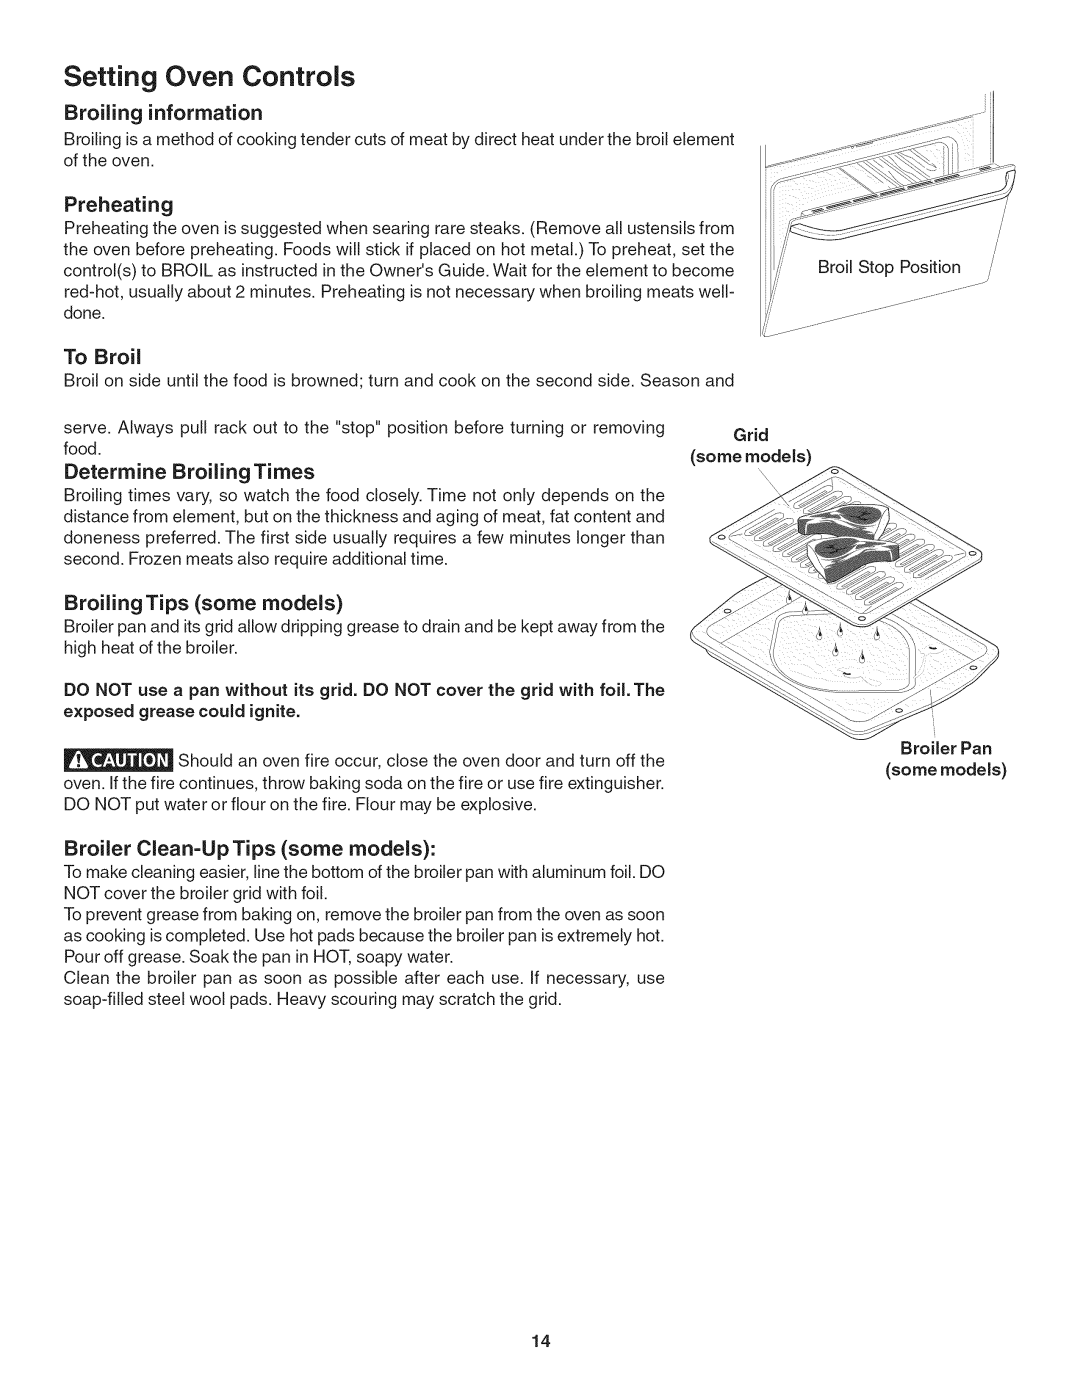 Kenmore 790.4019 manual Setting Oven Controls, Broiling information, Preheating, To Broil, Determine Broiling Times 